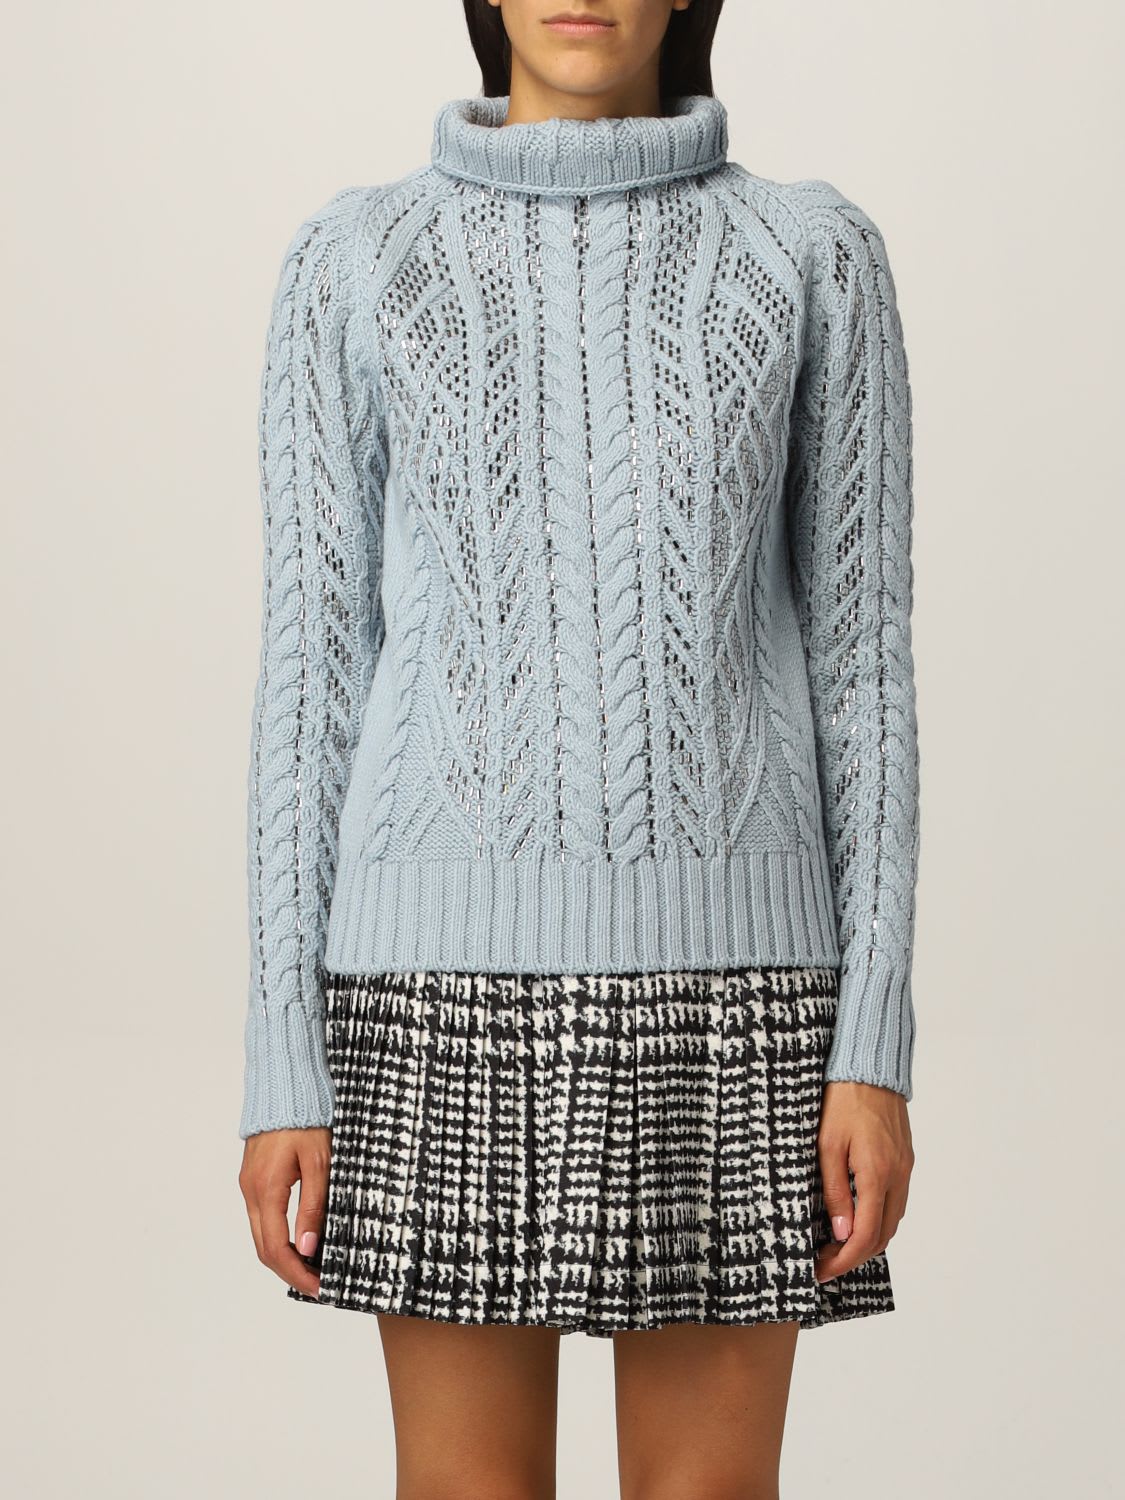 ERMANNO SCERVINO SWEATER IN VIRGIN WOOL WITH APPLICATIONS,D395M301CTHSK 64010